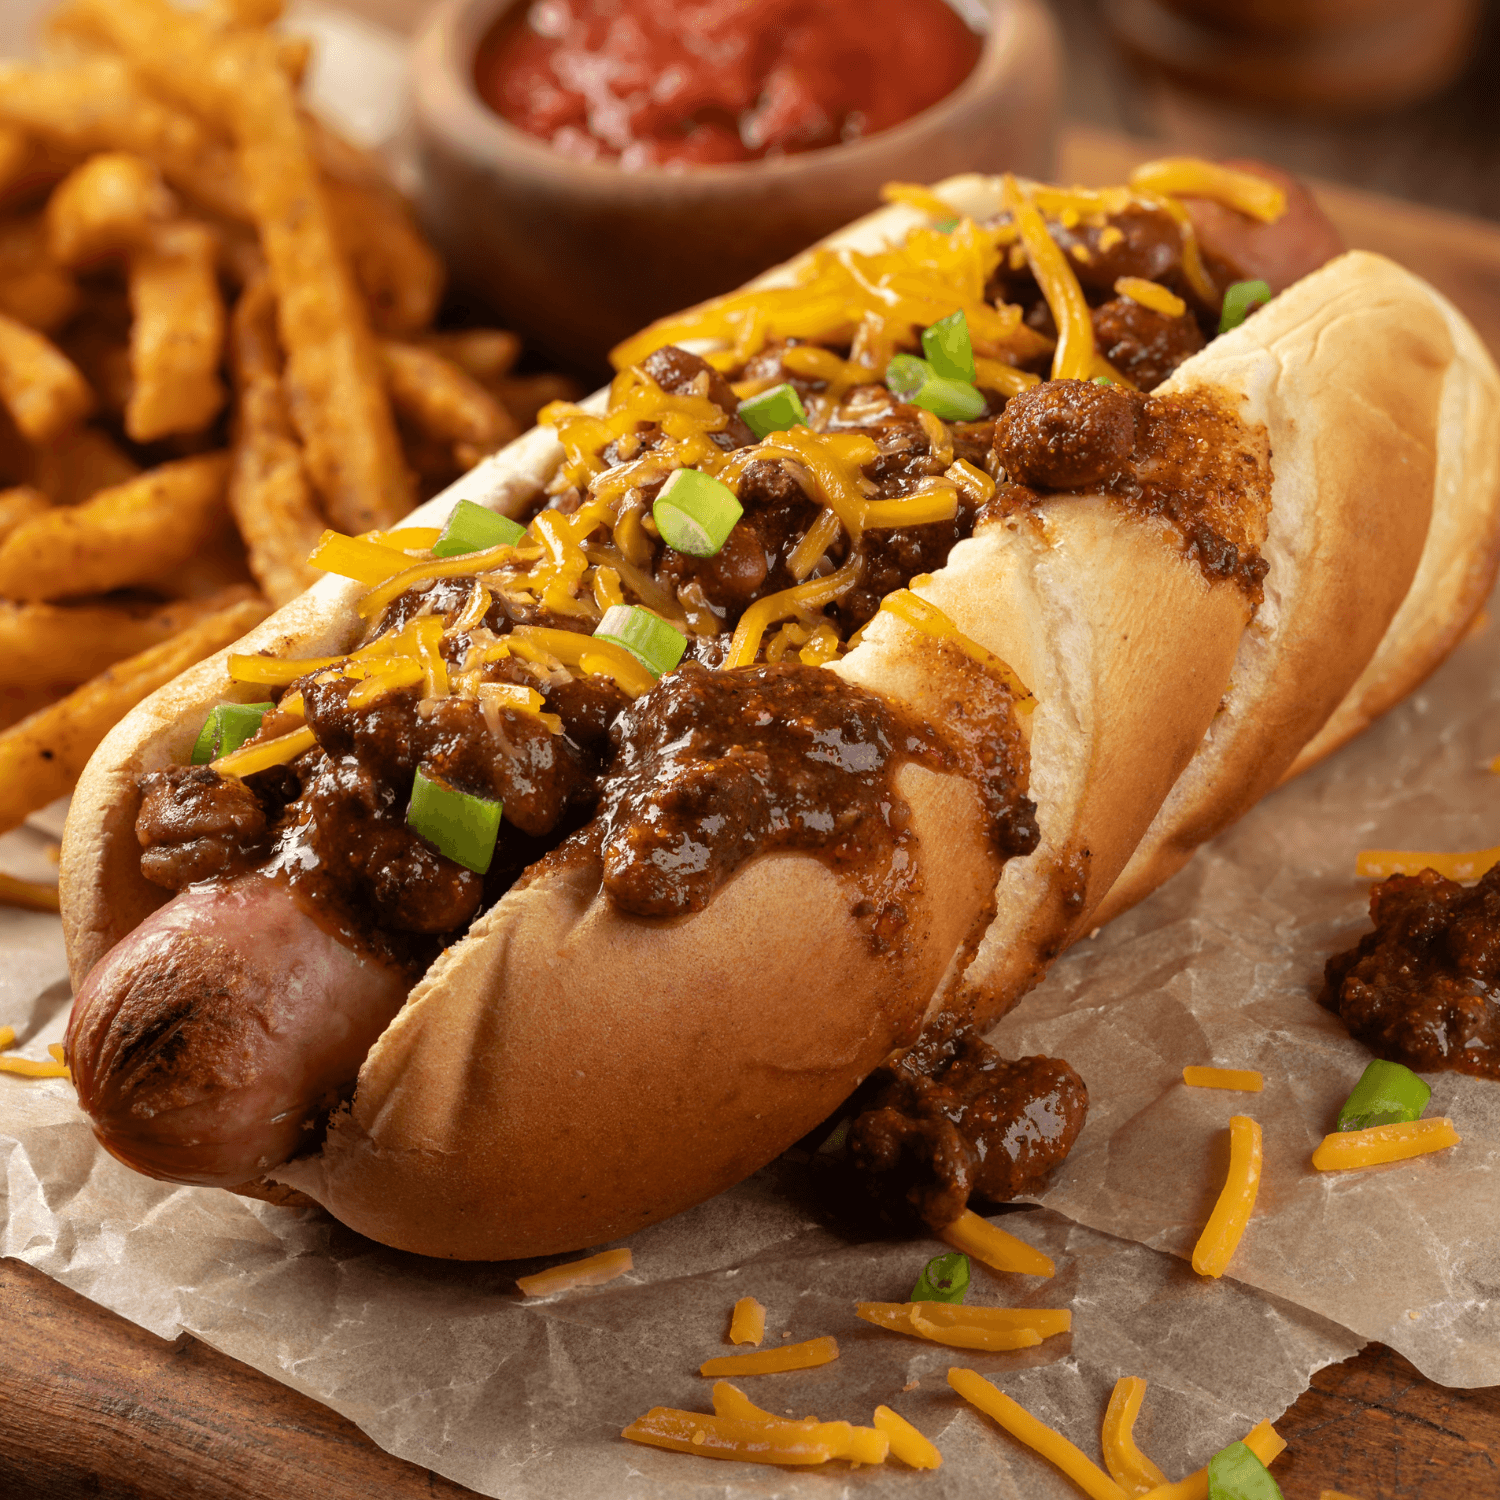 chili dog with onions